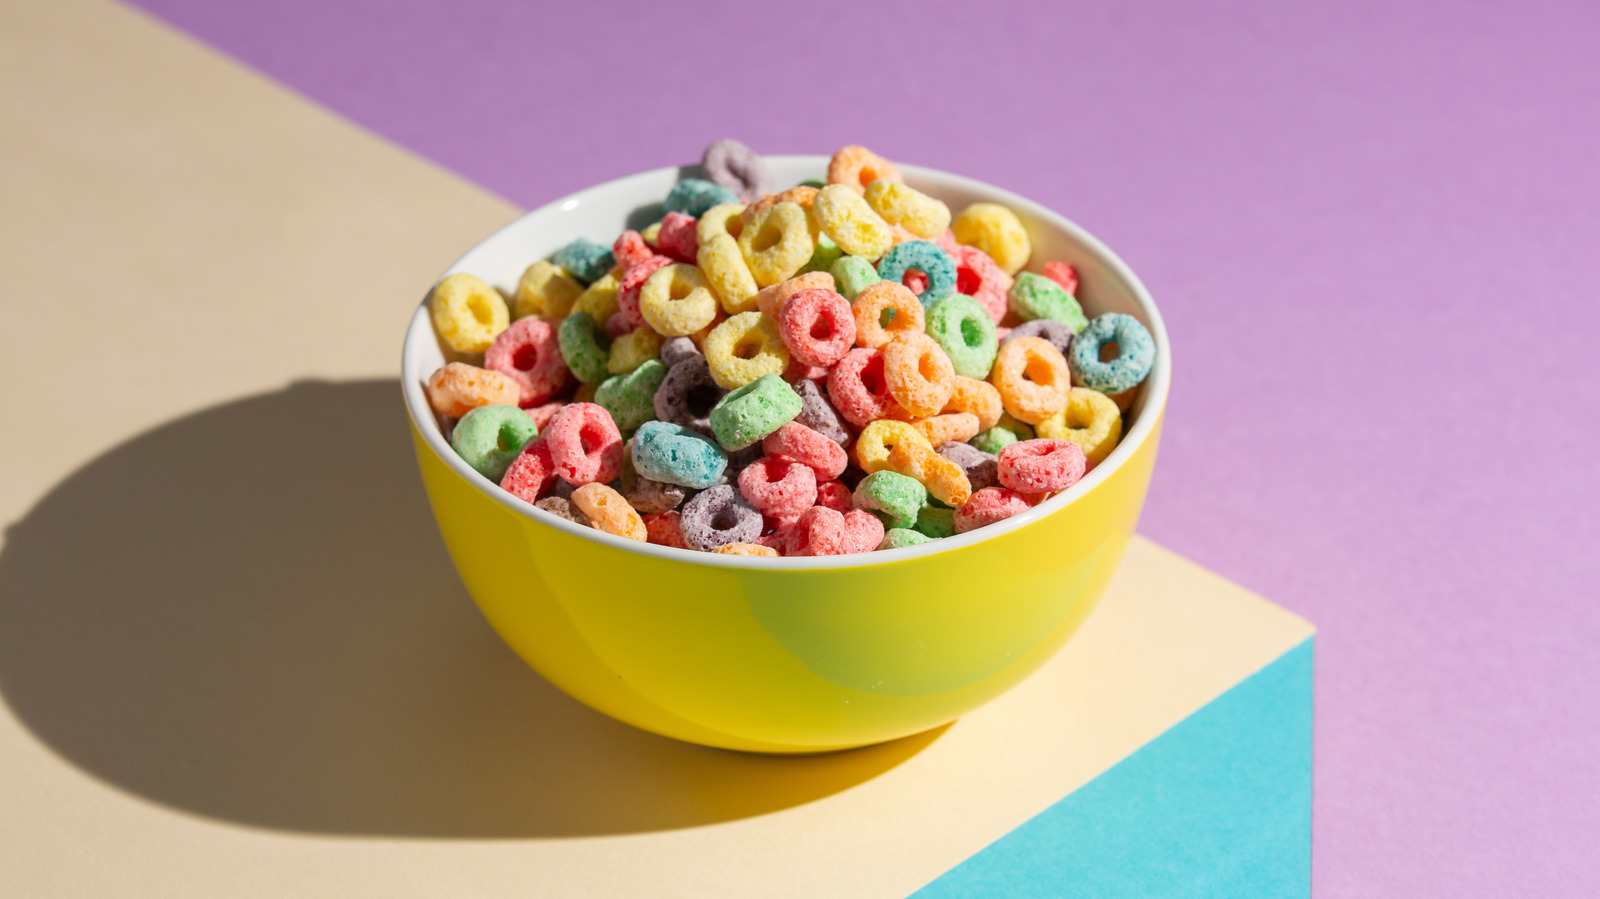 The Lawsuit That Made Kellogg's Change The Original Froot Loops Name